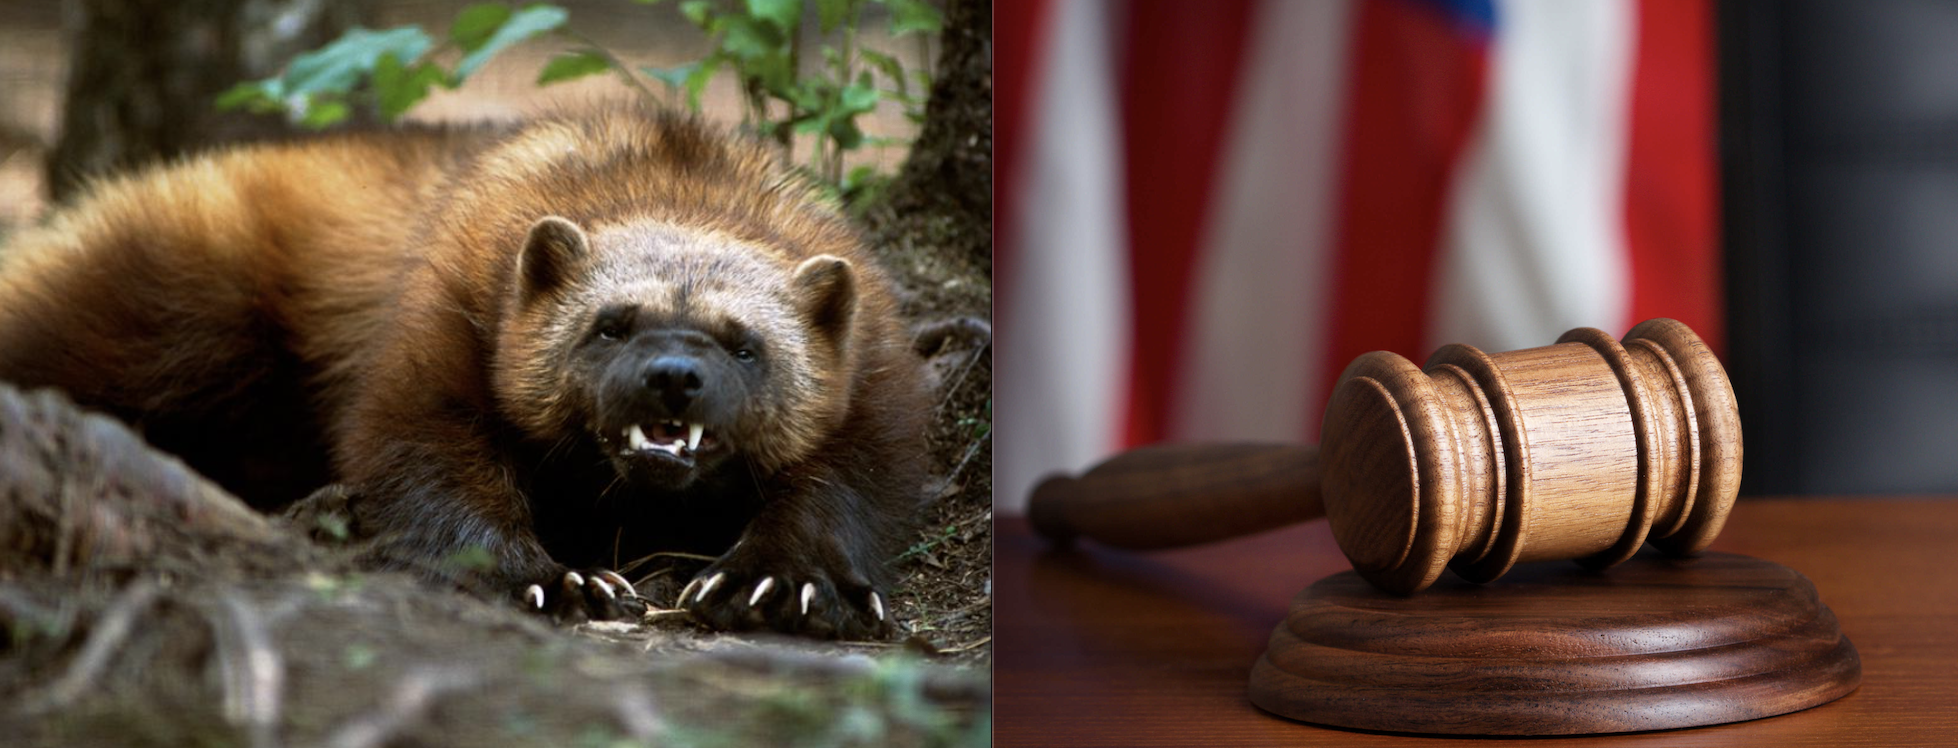 Epic Lawsuits: 24 Wildlife Orgs Sue Trump Admin for Failing to Protect Wolverine After FOIAed Documents Reveal Politically-Motivated ESA Review Process